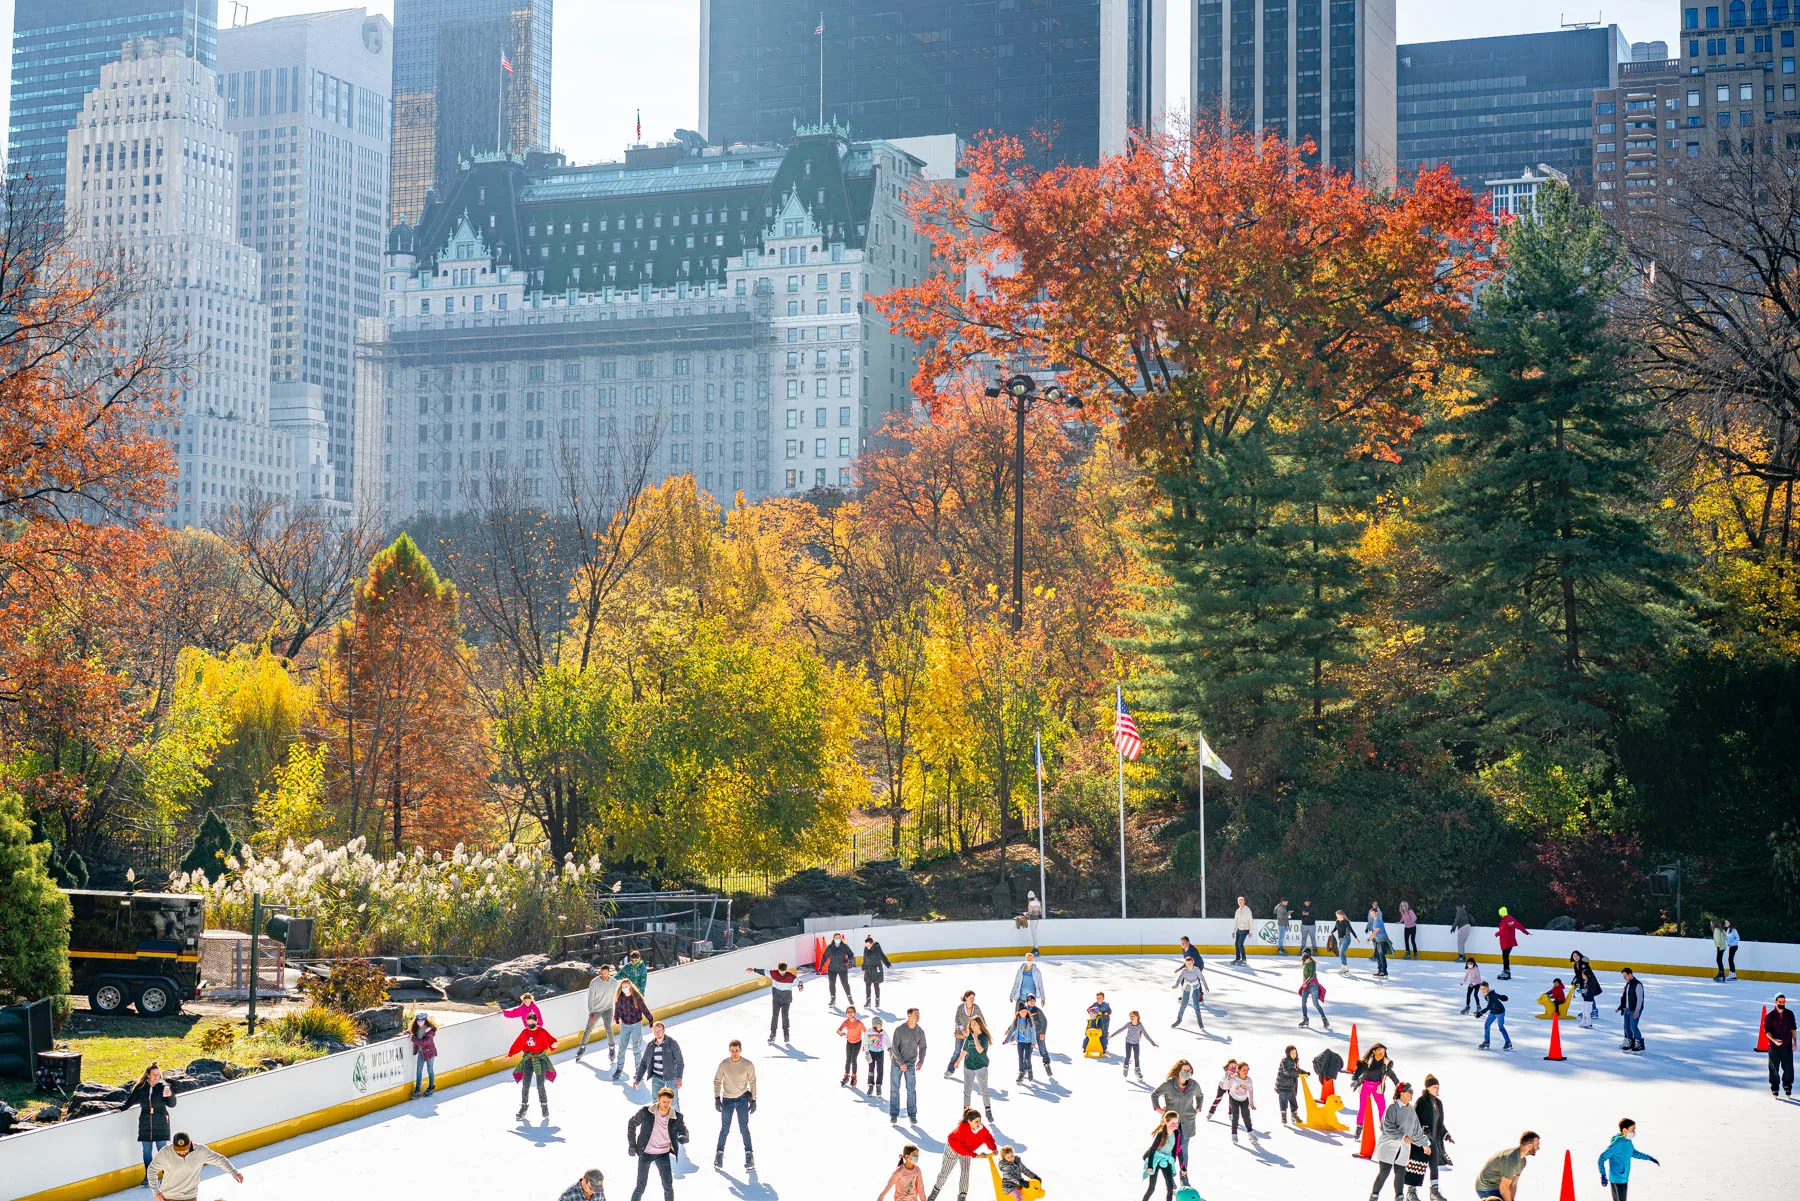 Visiting New York City in January, Wollman Rink